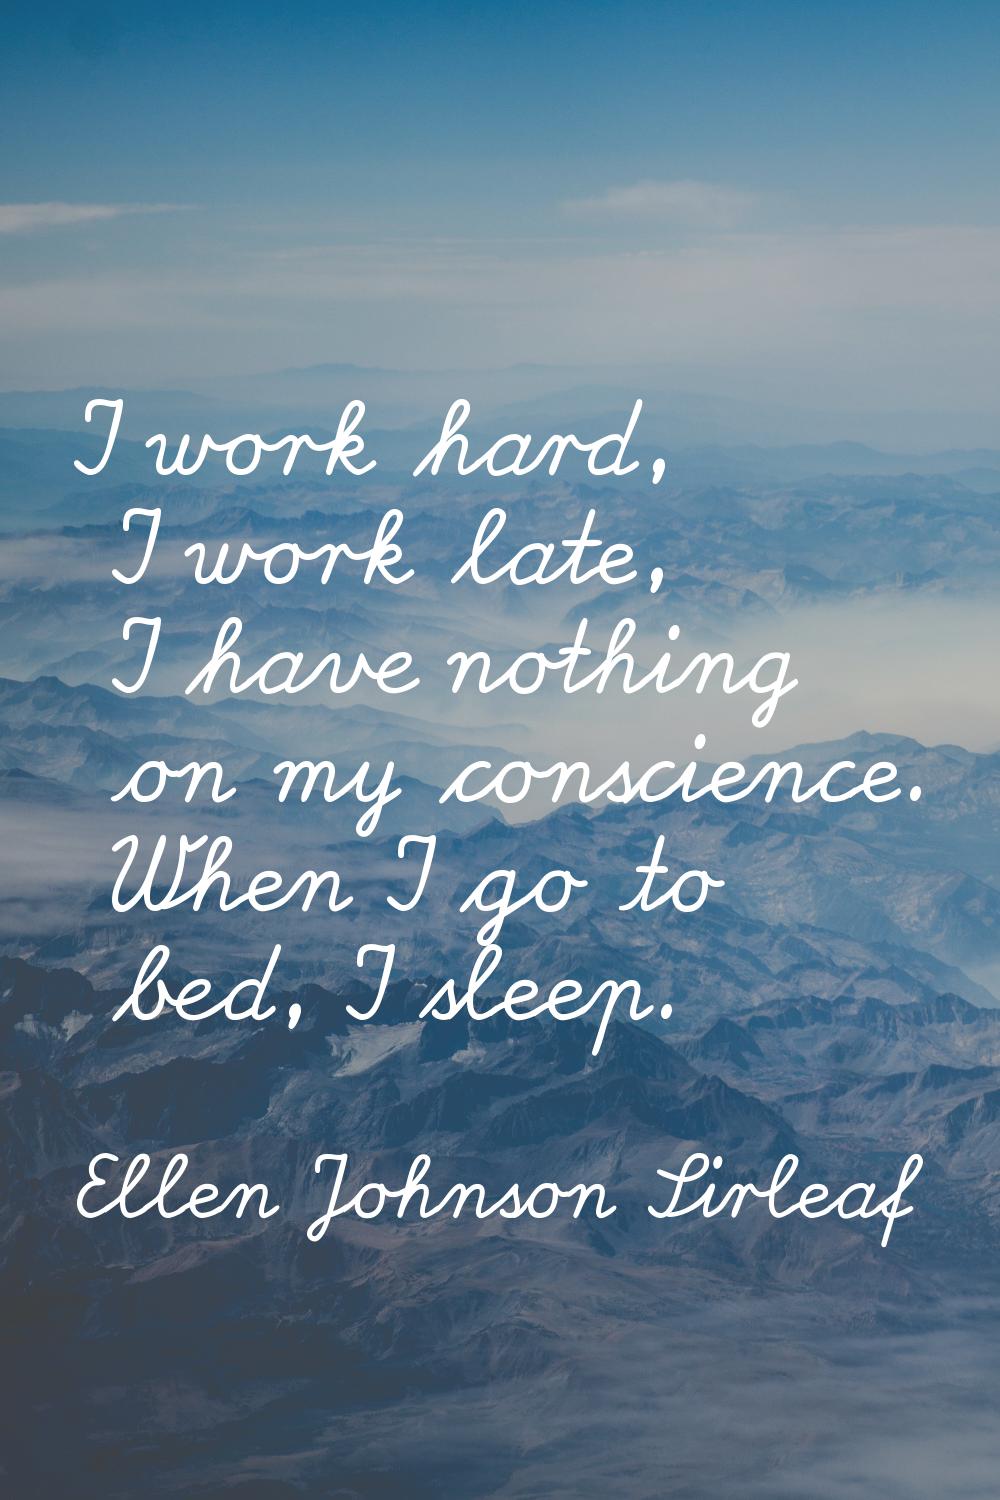 I work hard, I work late, I have nothing on my conscience. When I go to bed, I sleep.